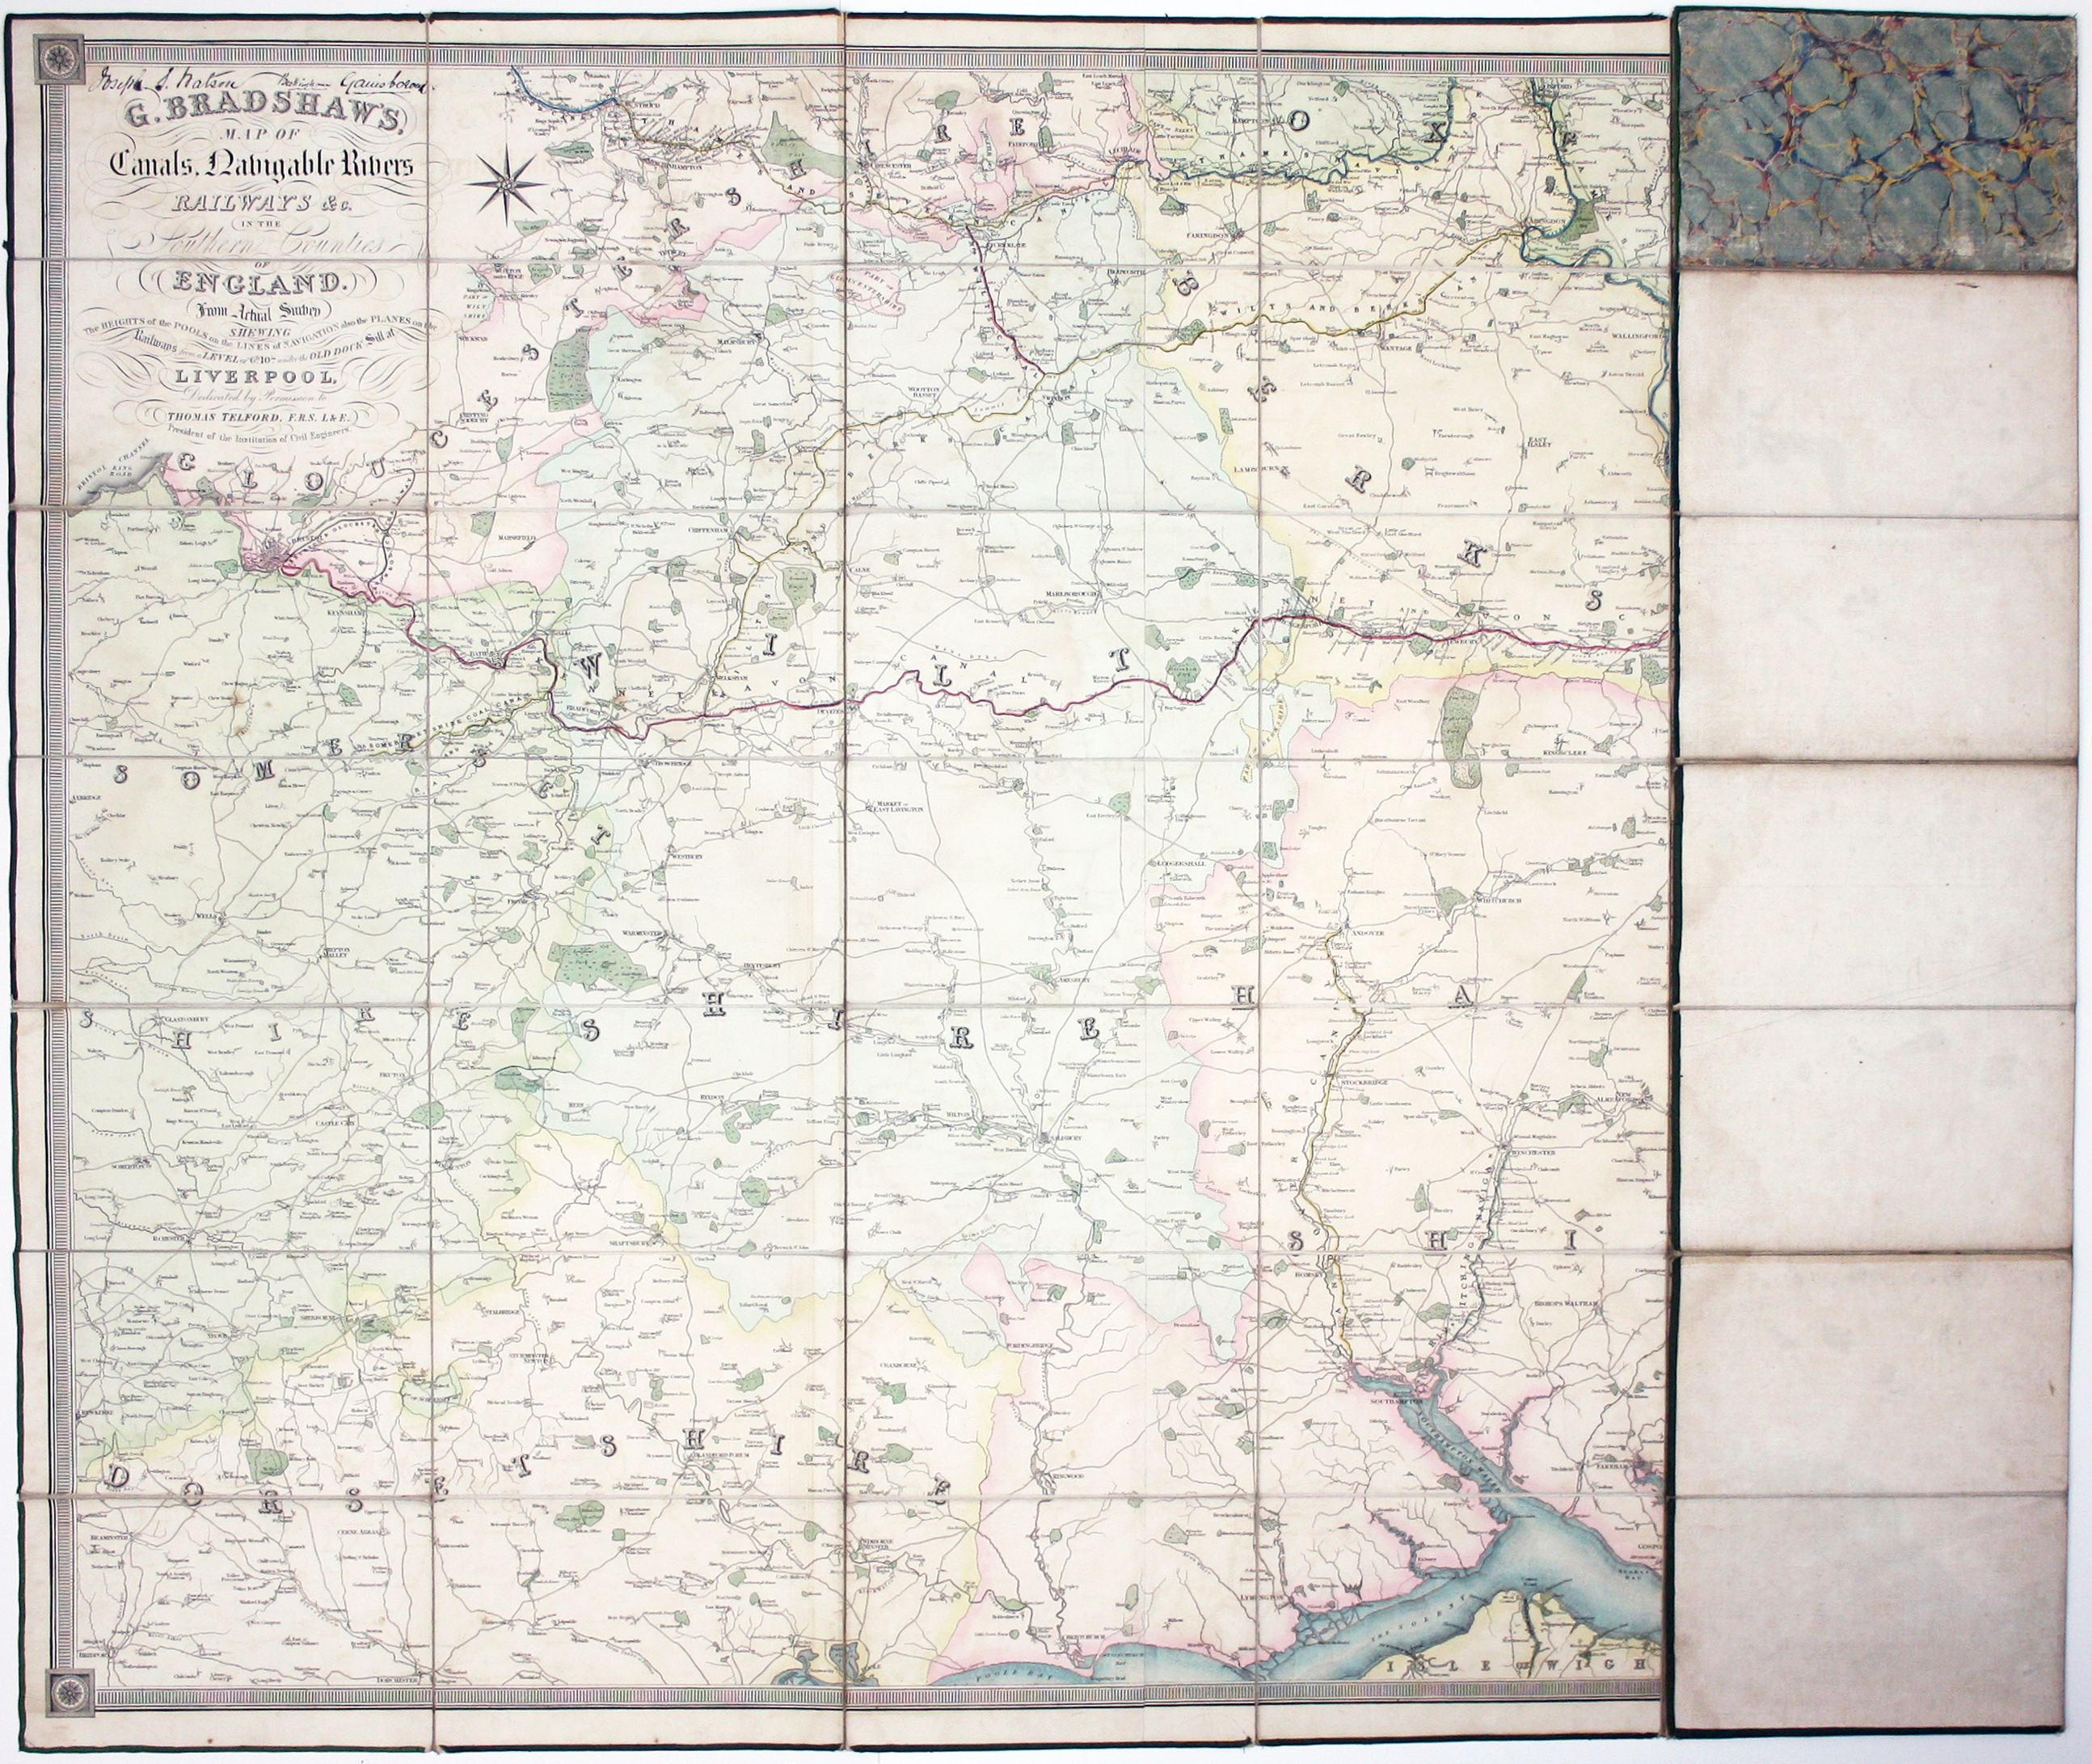 Bradshaw’s Early Canal Map of the Southern Counties